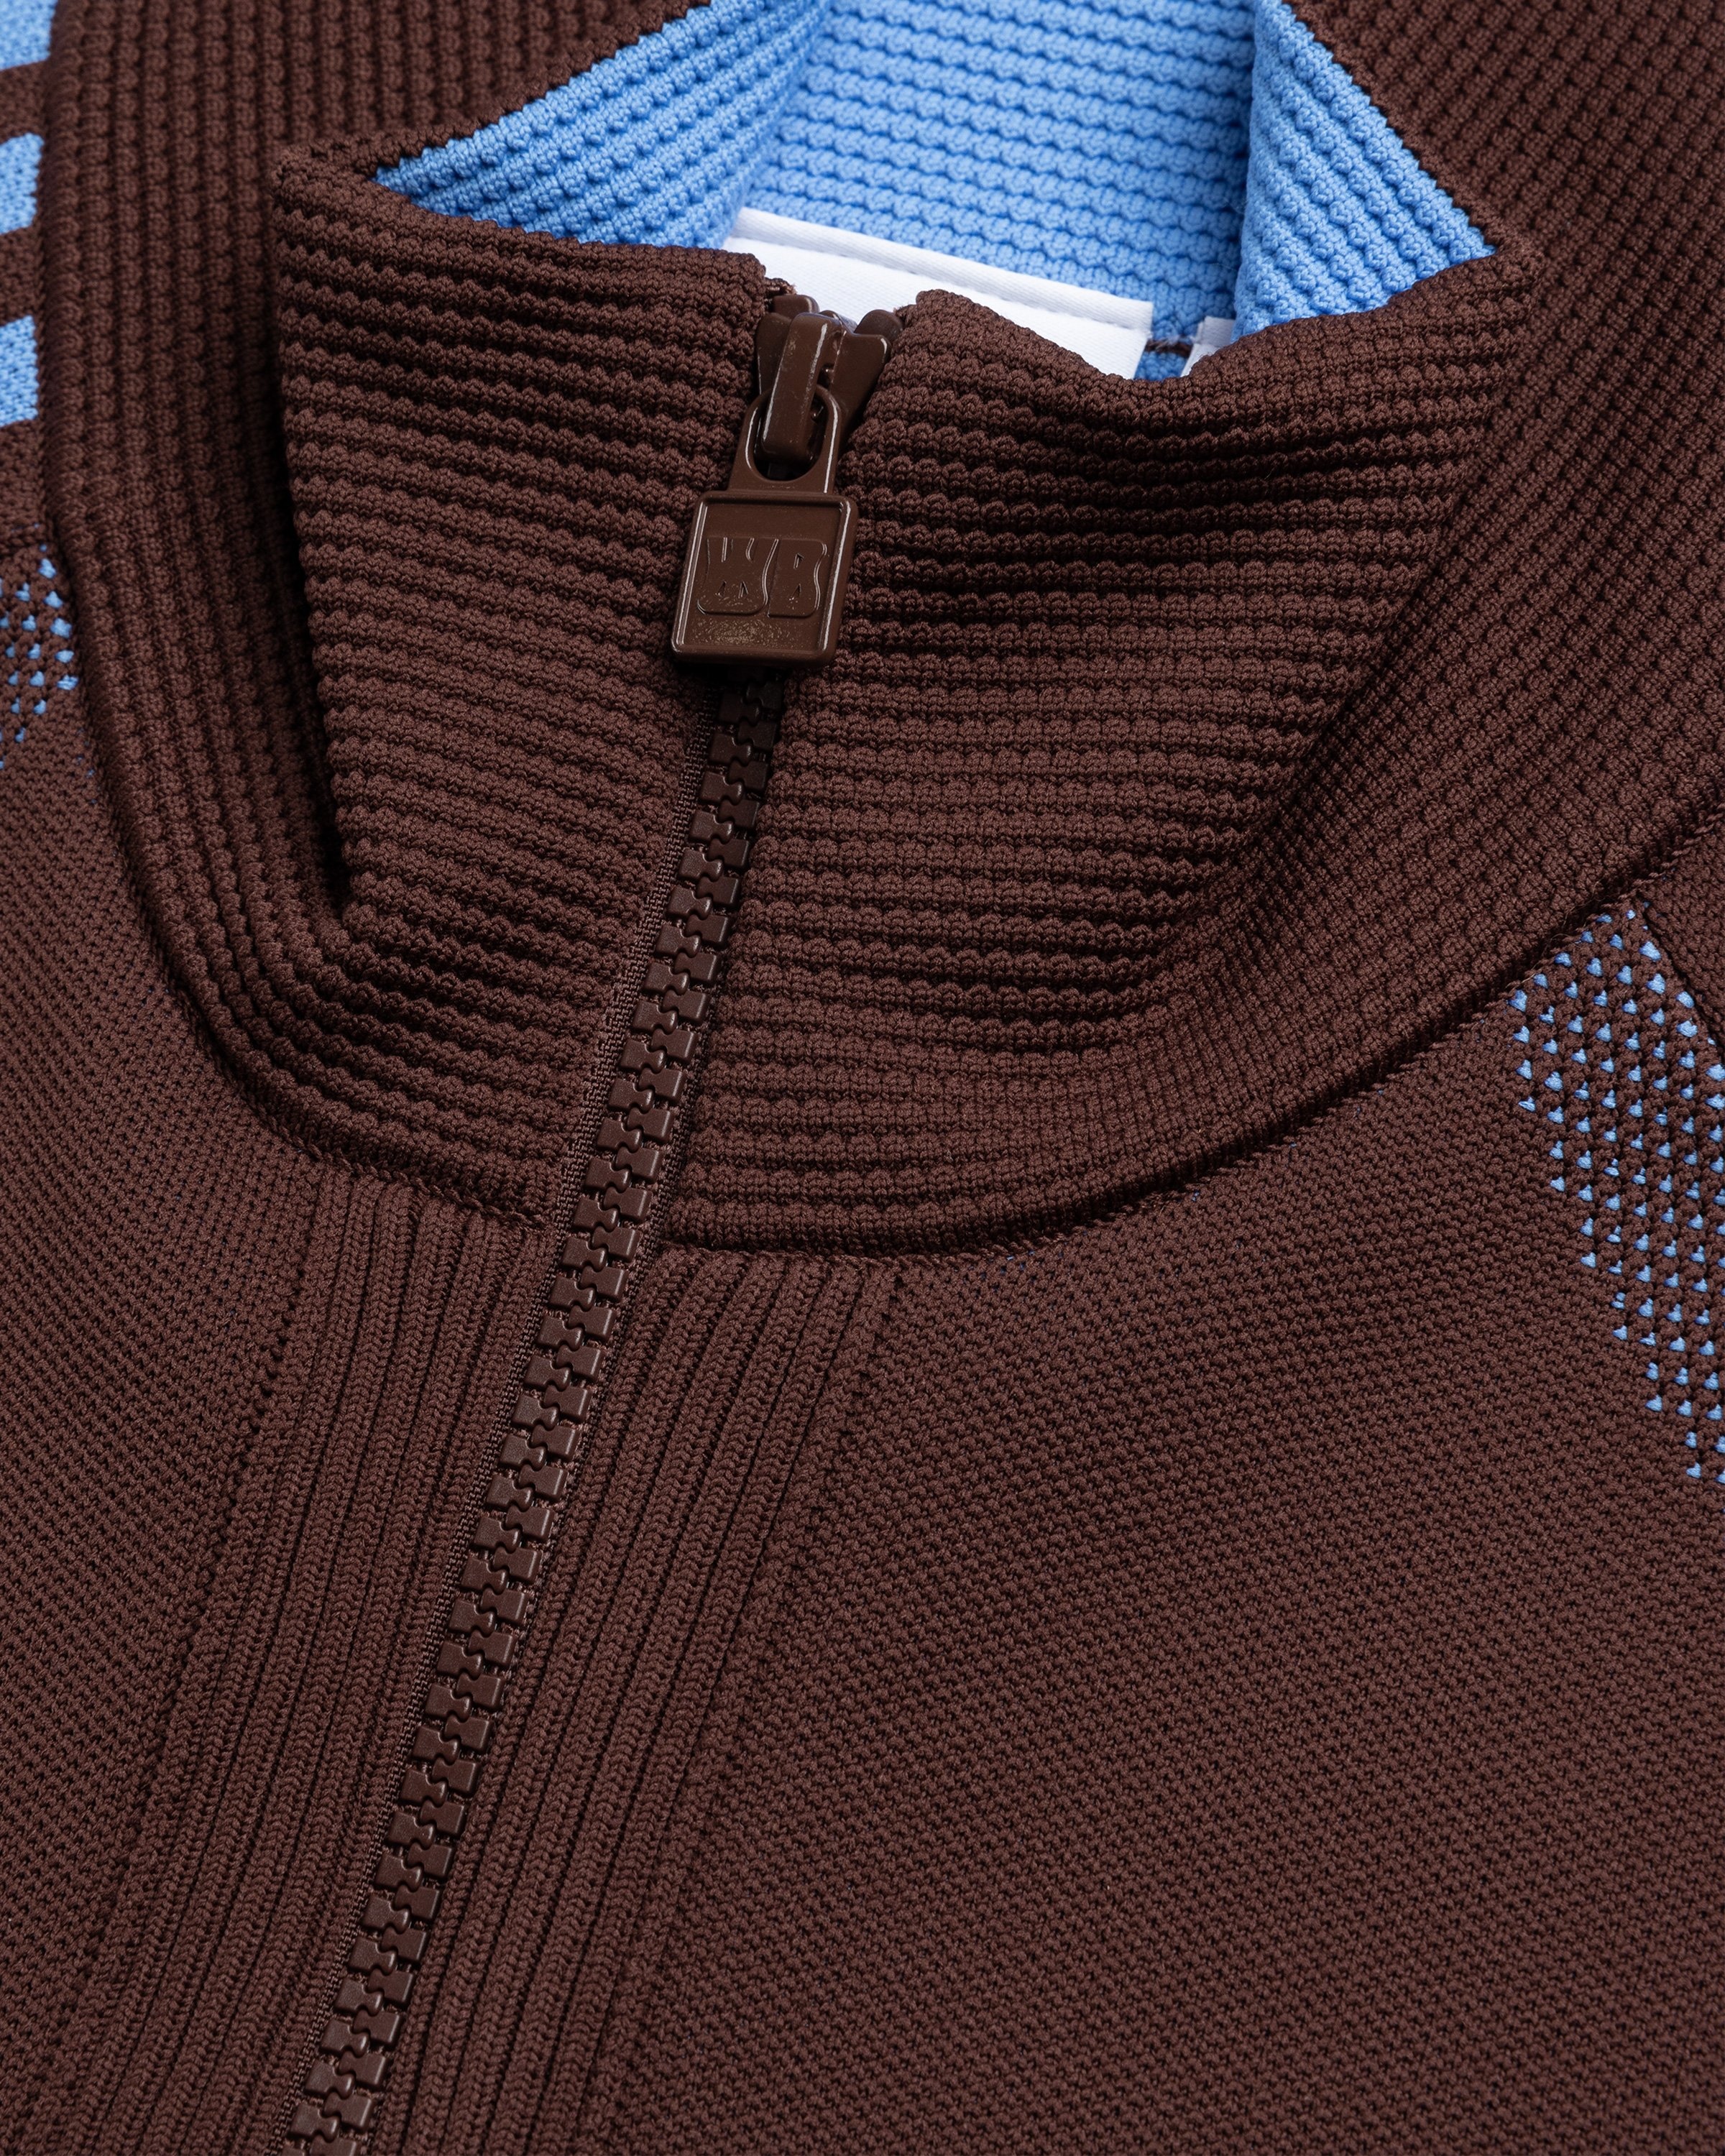 Adidas x Wales Bonner – Knit Track Top Mystery Brown - Tops - Brown - Image 6